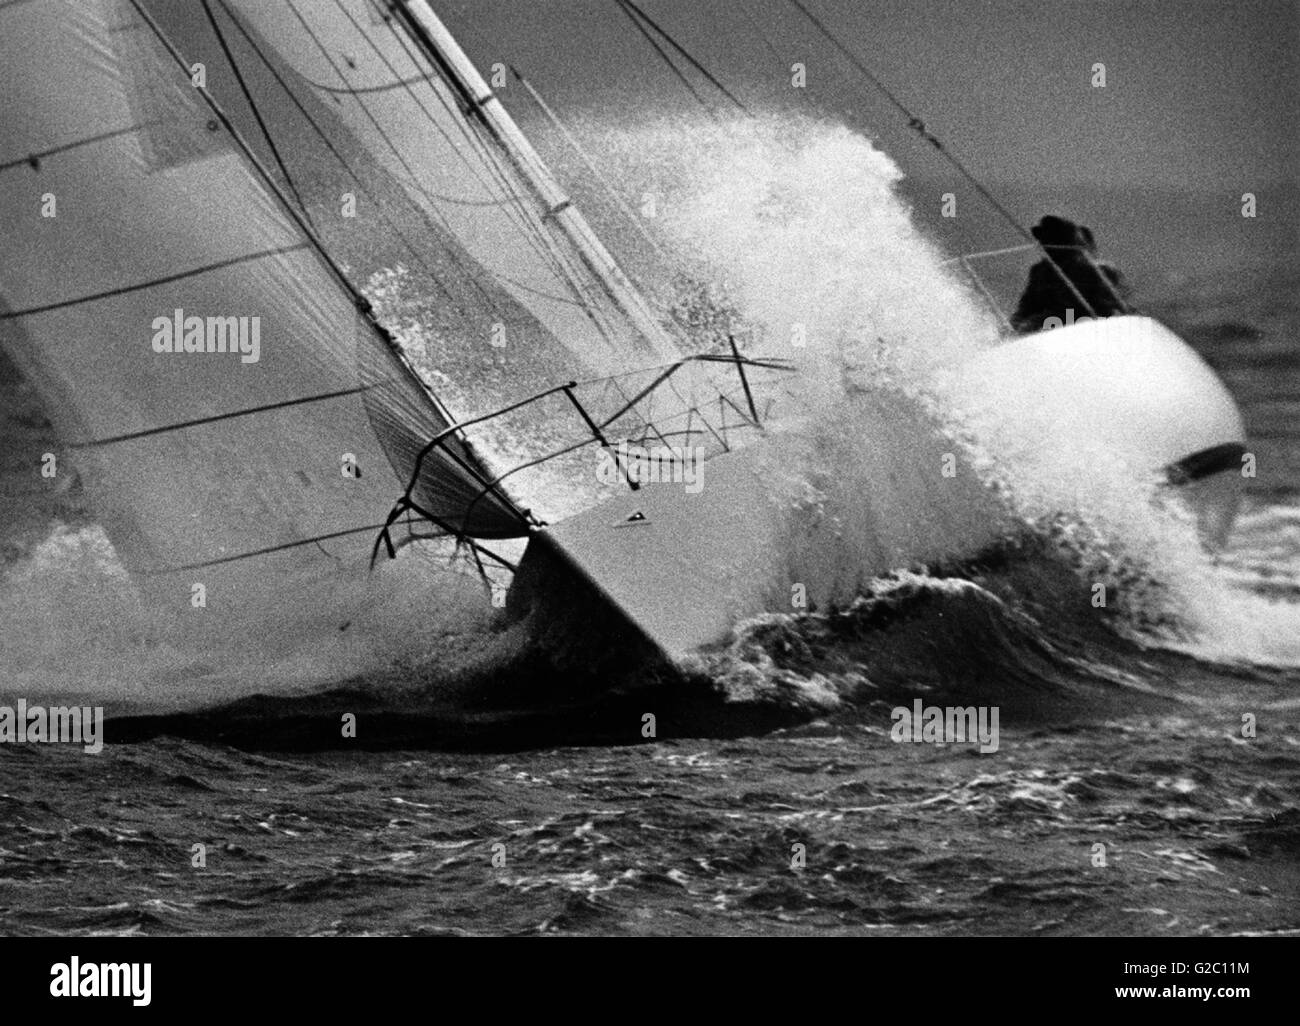 AJAX NEWS PHOTOS. 1977. SOLENT, ENGLAND. - CERVANTES TROPHY RACE - THE AUSTRALIAN ADMIRAL'S CUP YACHT BUMBLEBEE III TAKES A POUNDING AS IT HEADS TOWARD OPEN WATER AND THE CHANNEL. PHOTO:JONATHAN EASTLAND/AJAX REF: 77CERTRO/BUMBLEBEE Stock Photo